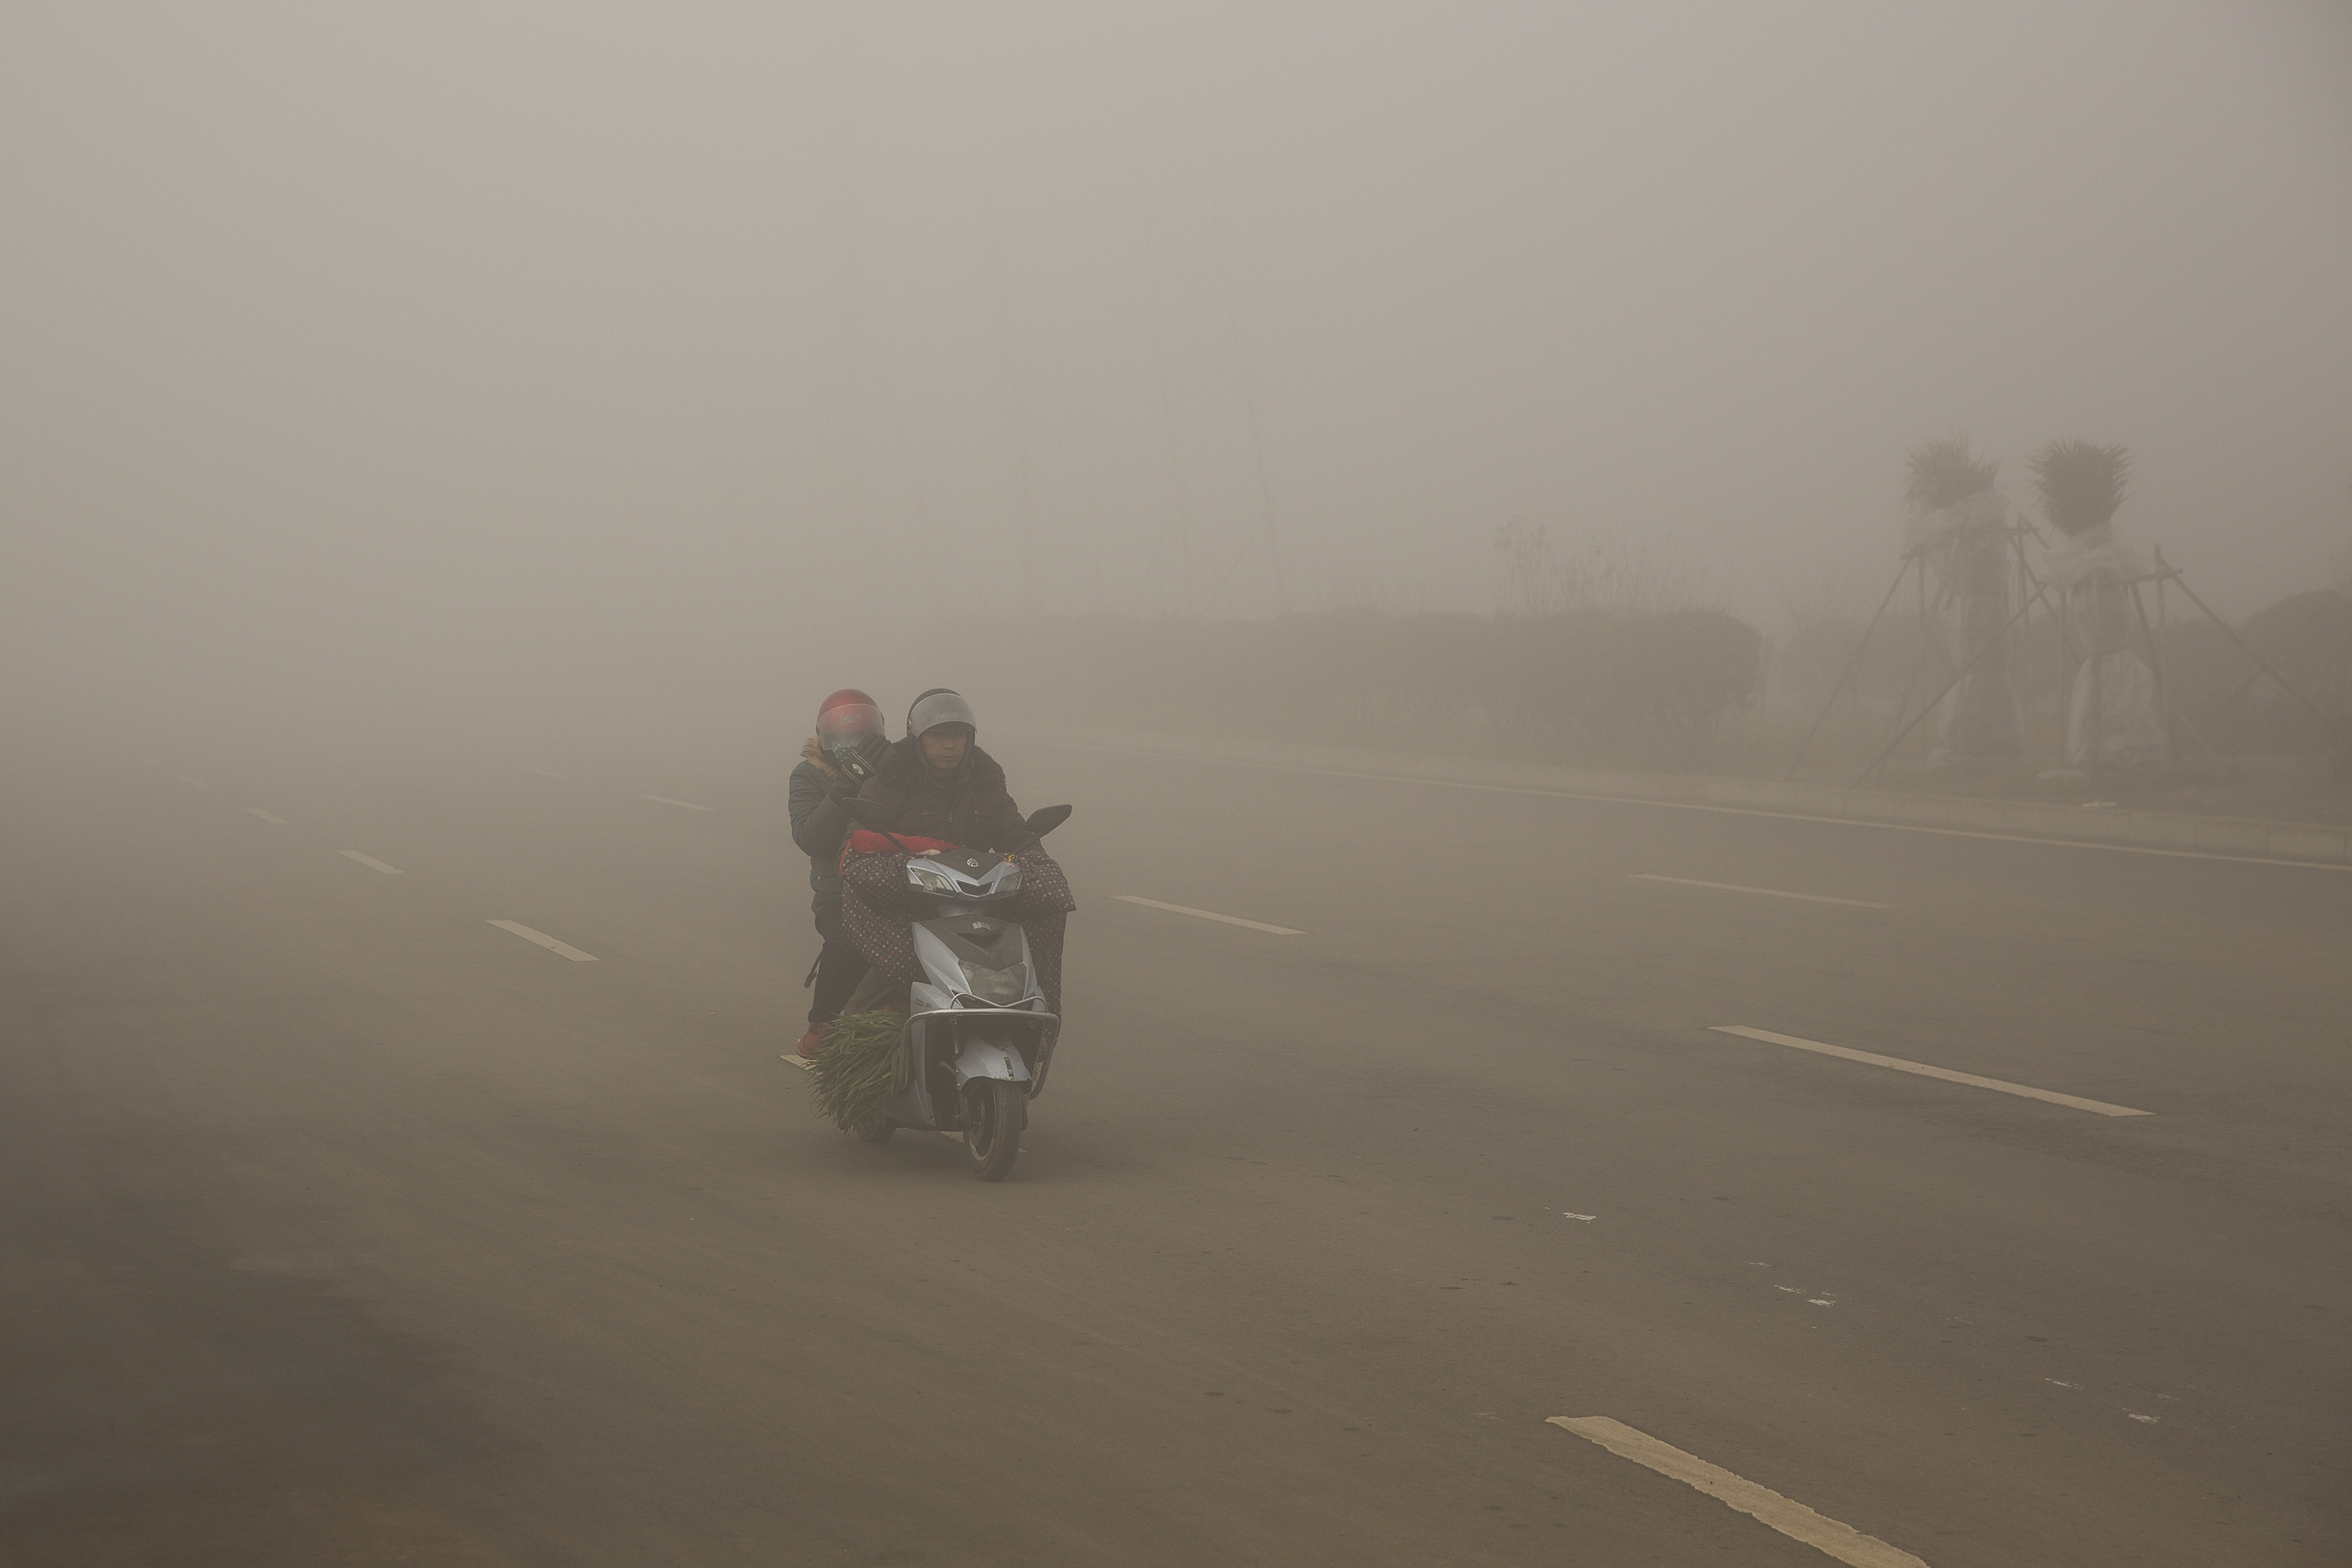 Cyclists ride along a road in heavy smog on Dec. 31, 2016 in Beijing, China. (Lintao Zhang—Getty Images)